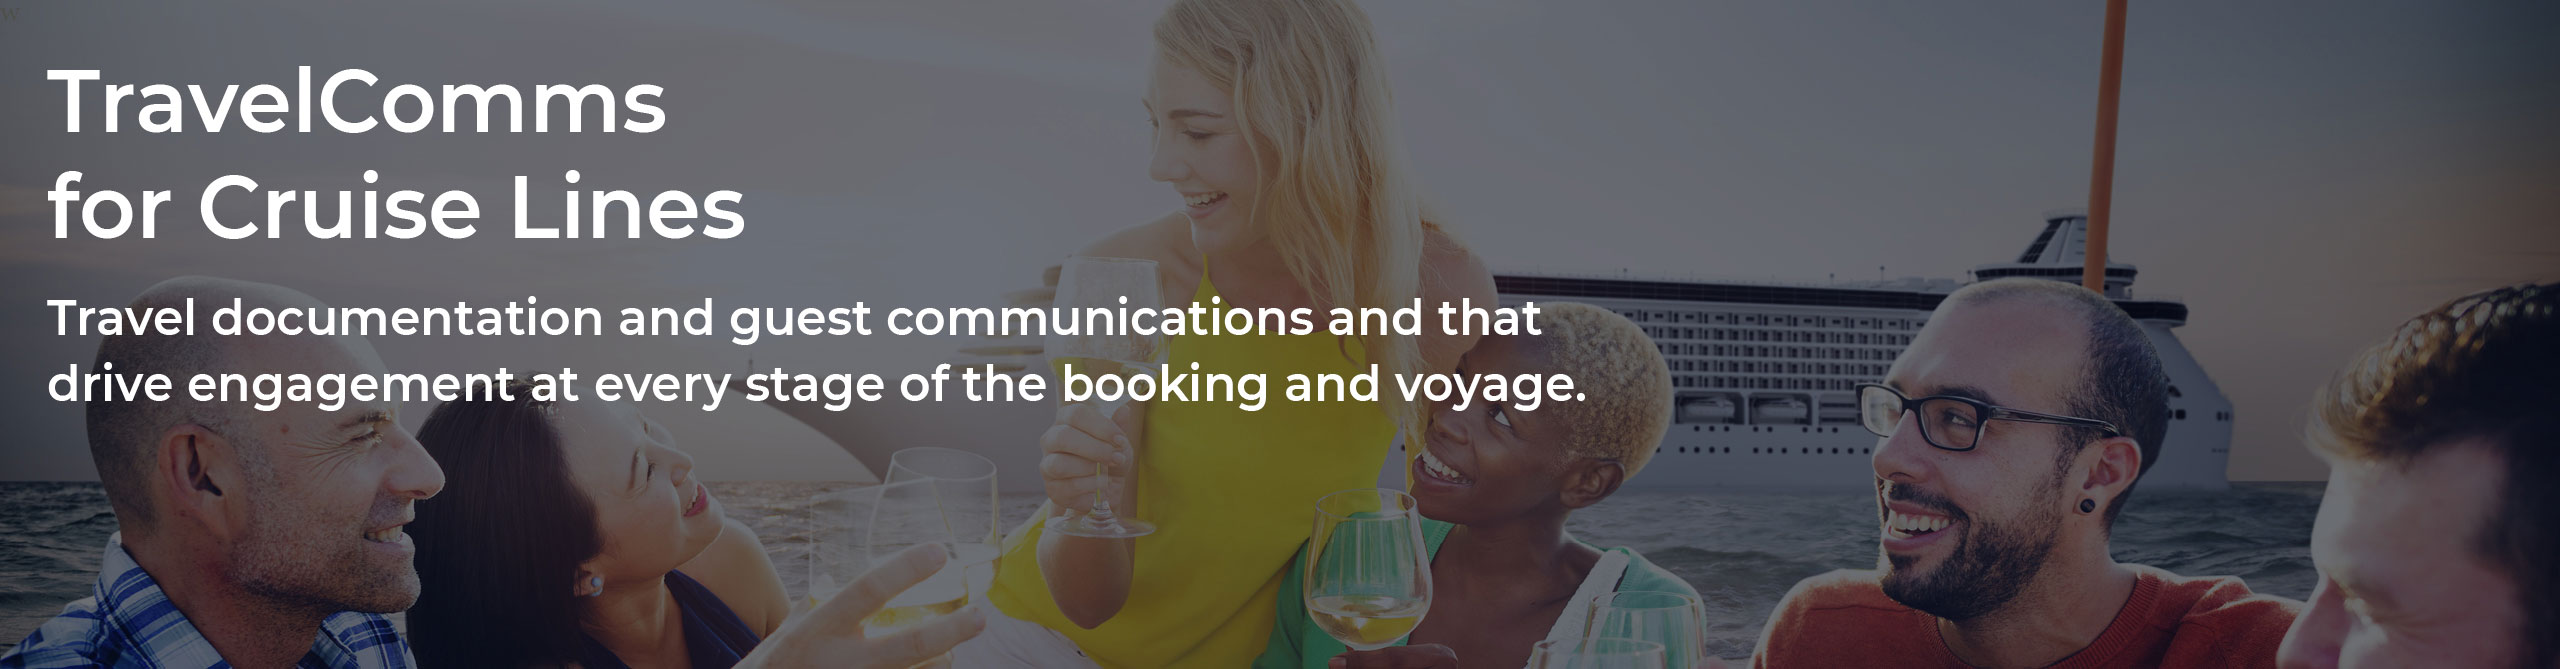 TravelComms for Cruise Lines